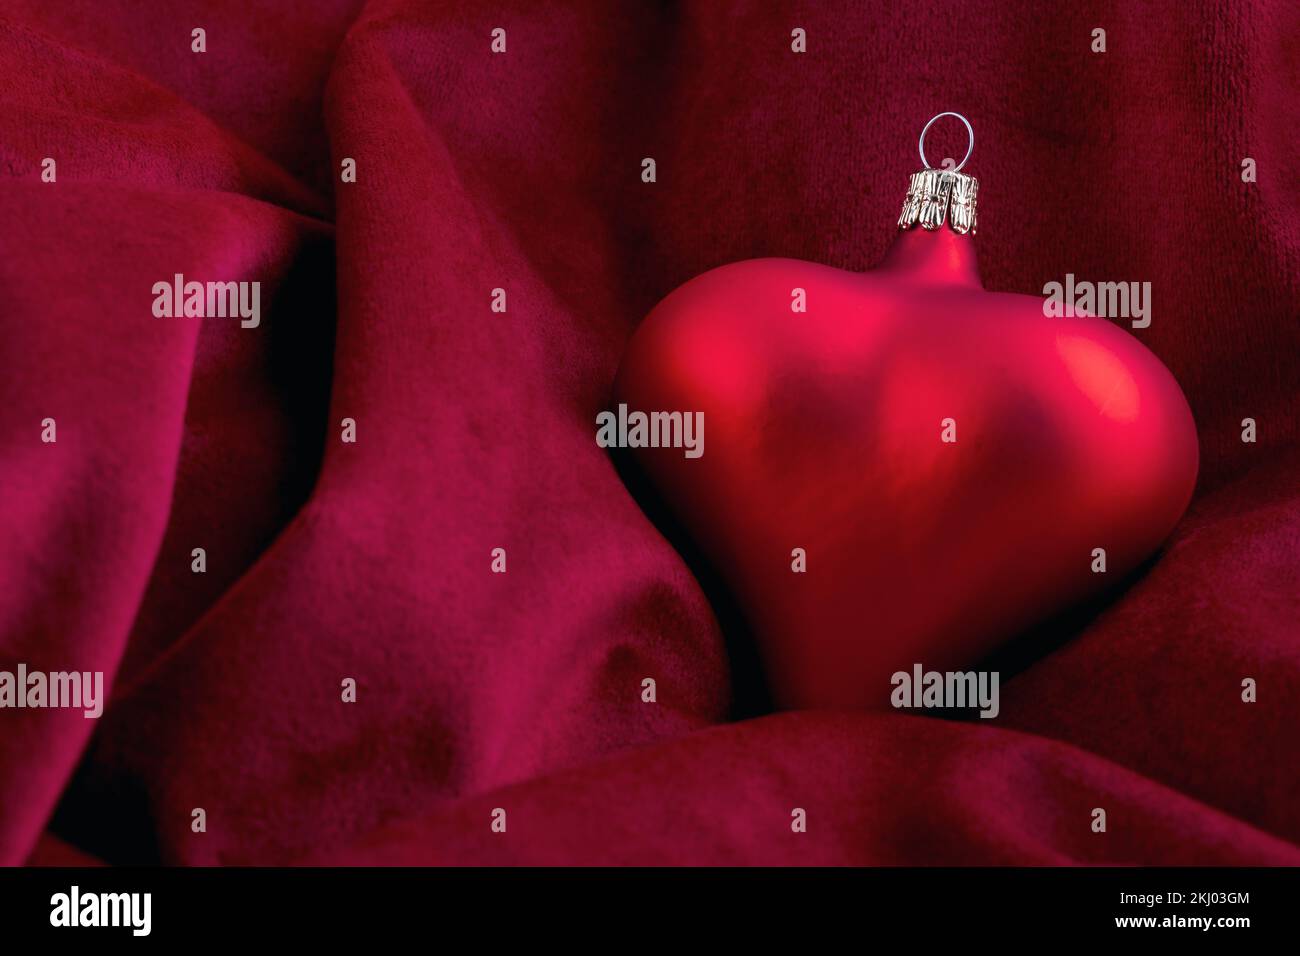 A romantic red christmas bauble in the shape of a heart on a snug and soft velvet blanket. Stock Photo